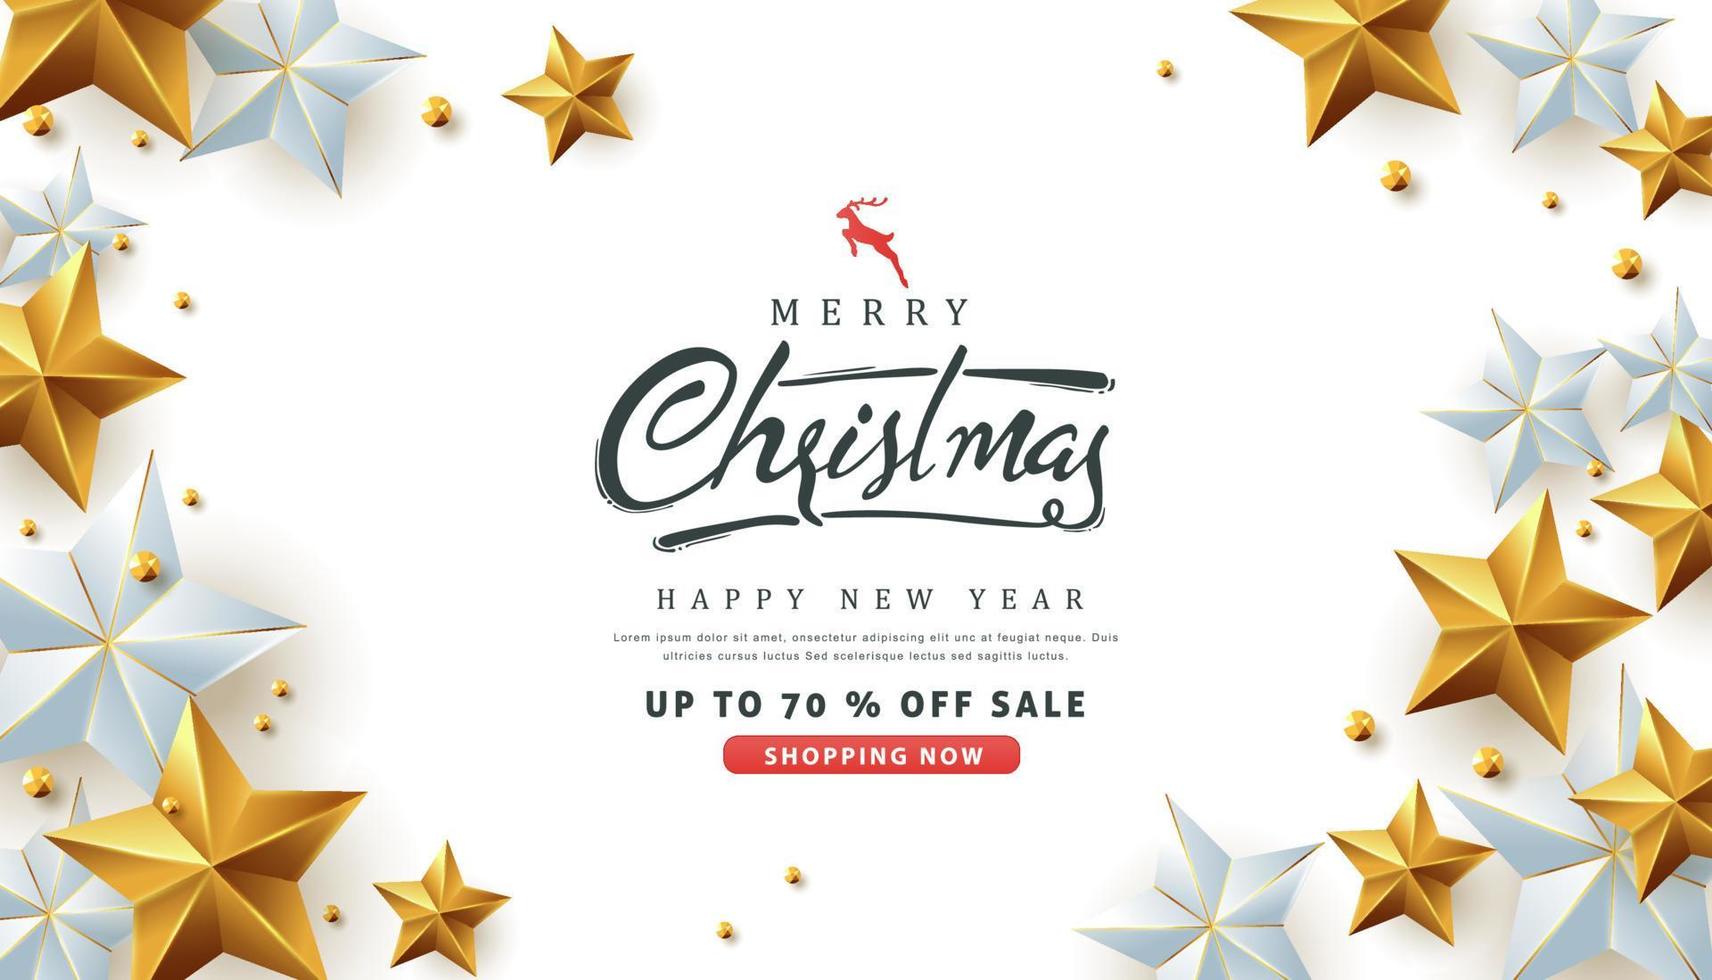 Happy New Year and Merry Christmas sale banner poster template vector